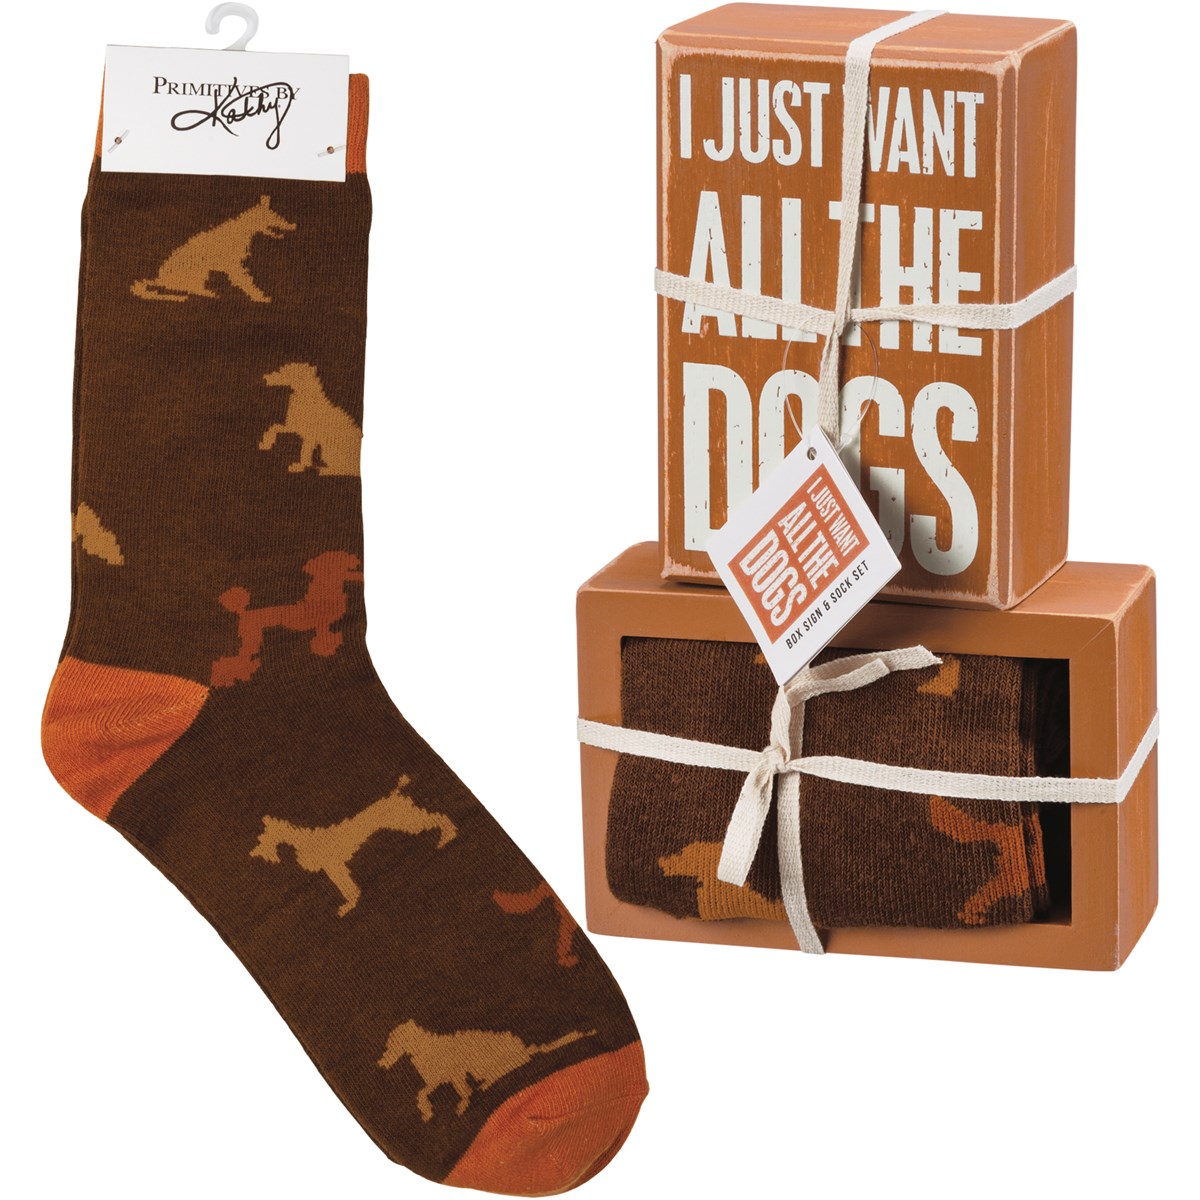 Box Sign & Sock Set - I Just Want All The Dogs - Box Sign: 4.50" x 3" x 1.75", Socks: One Size Fits Most - Wood, Cotton, Nylon, Spandex, Ribbon